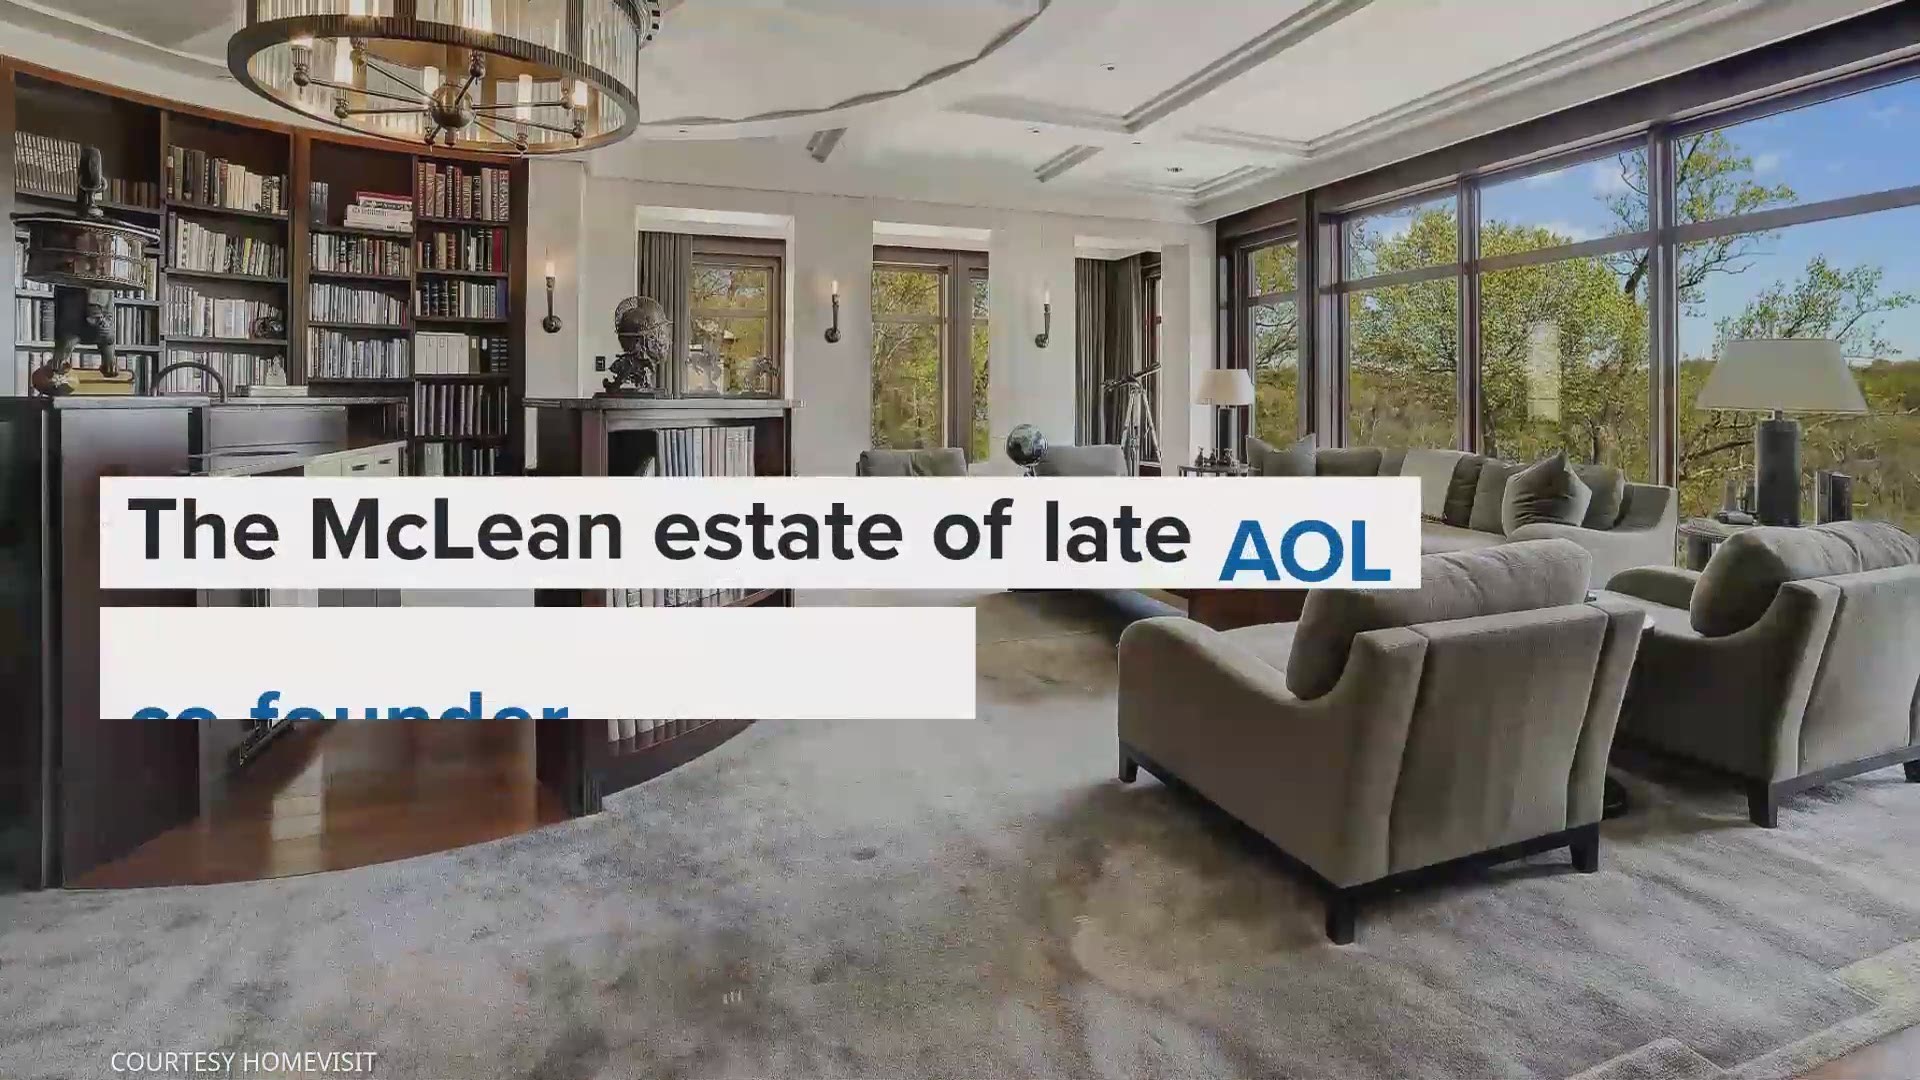 The McLean estate of late AOL co-founder James Kimsey sold in January for $45 million.